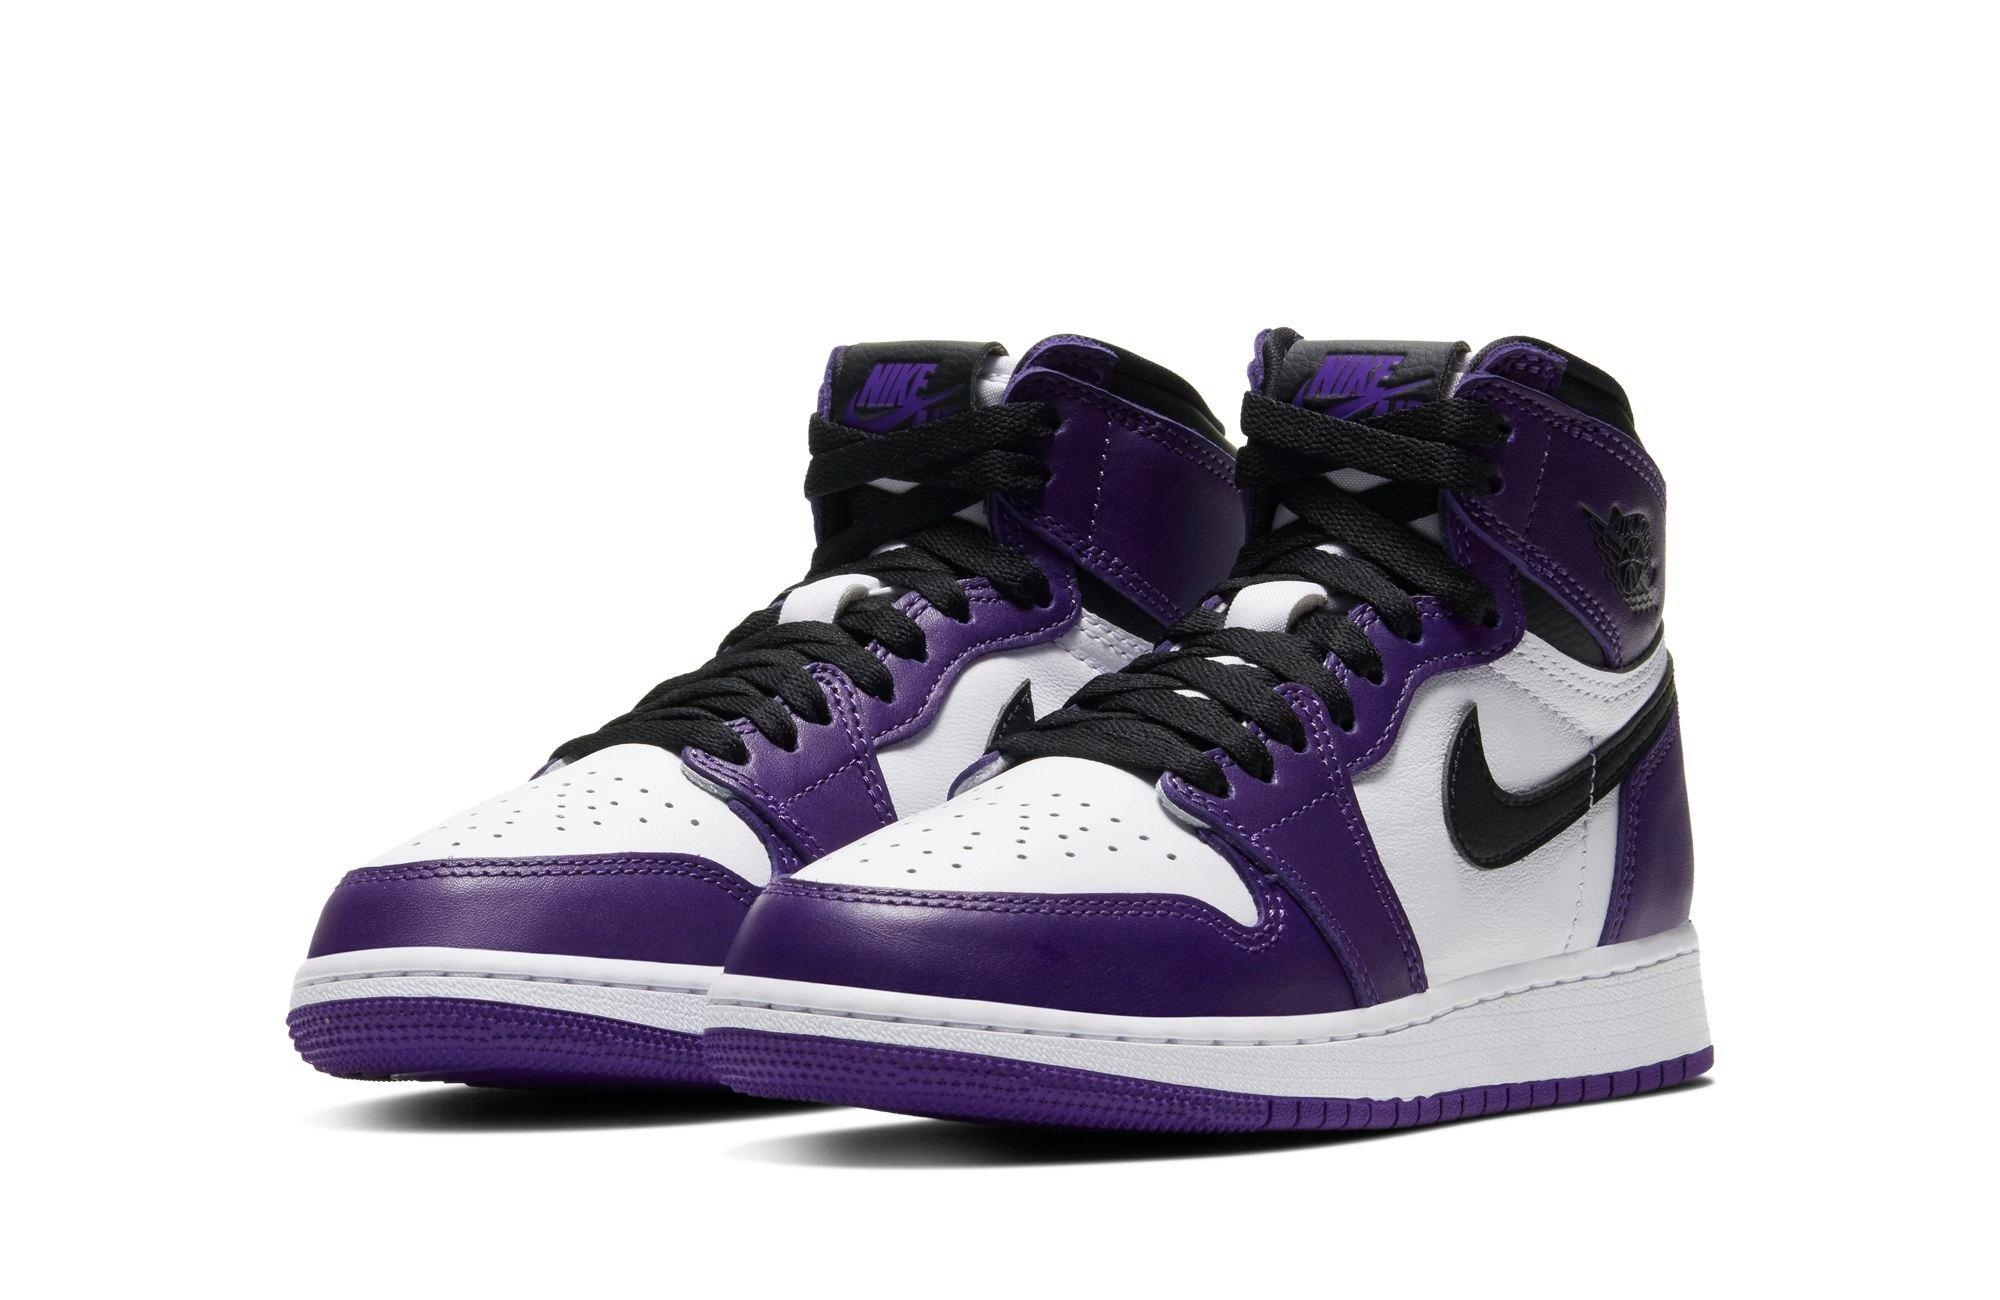 1/6 Scale Sneakers Sports Shoes Trainers Air AJ1 Purple 